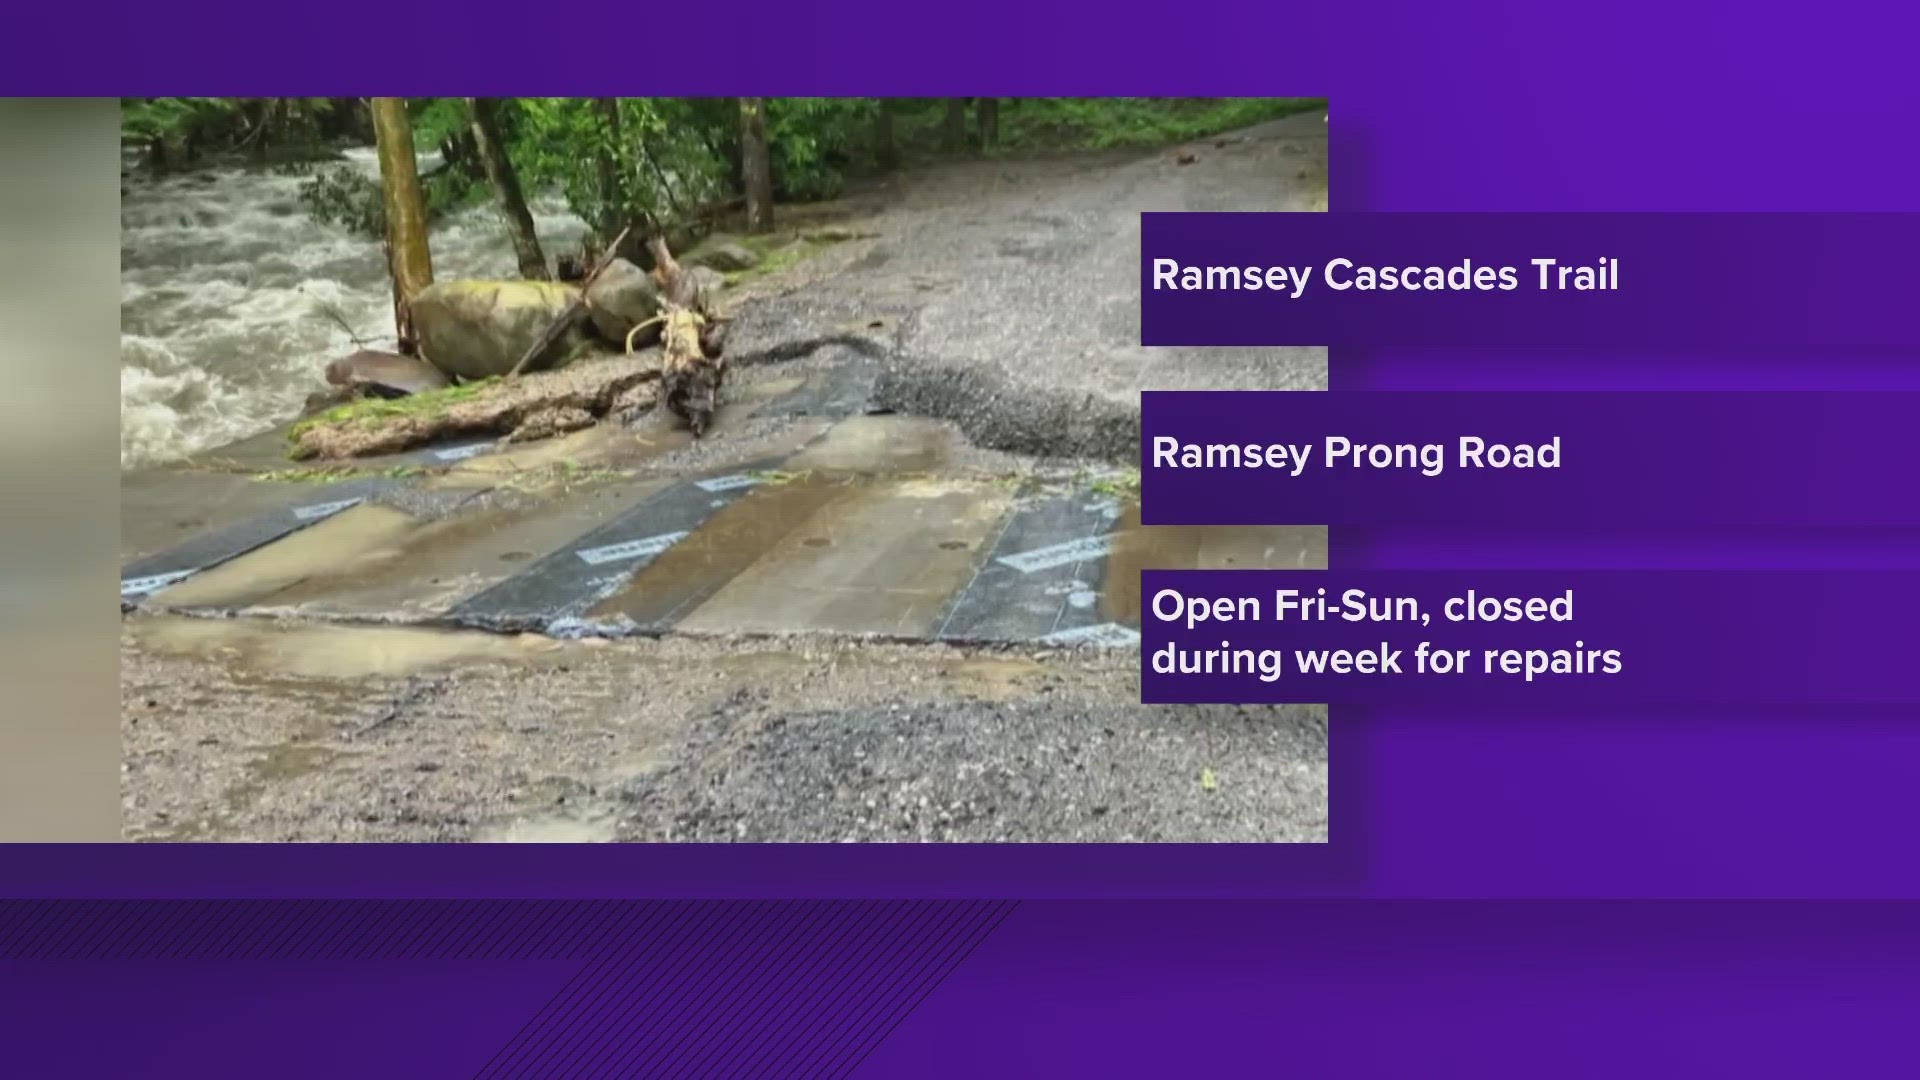 The trail was closed after part of it washed out during a flood event in 2022.